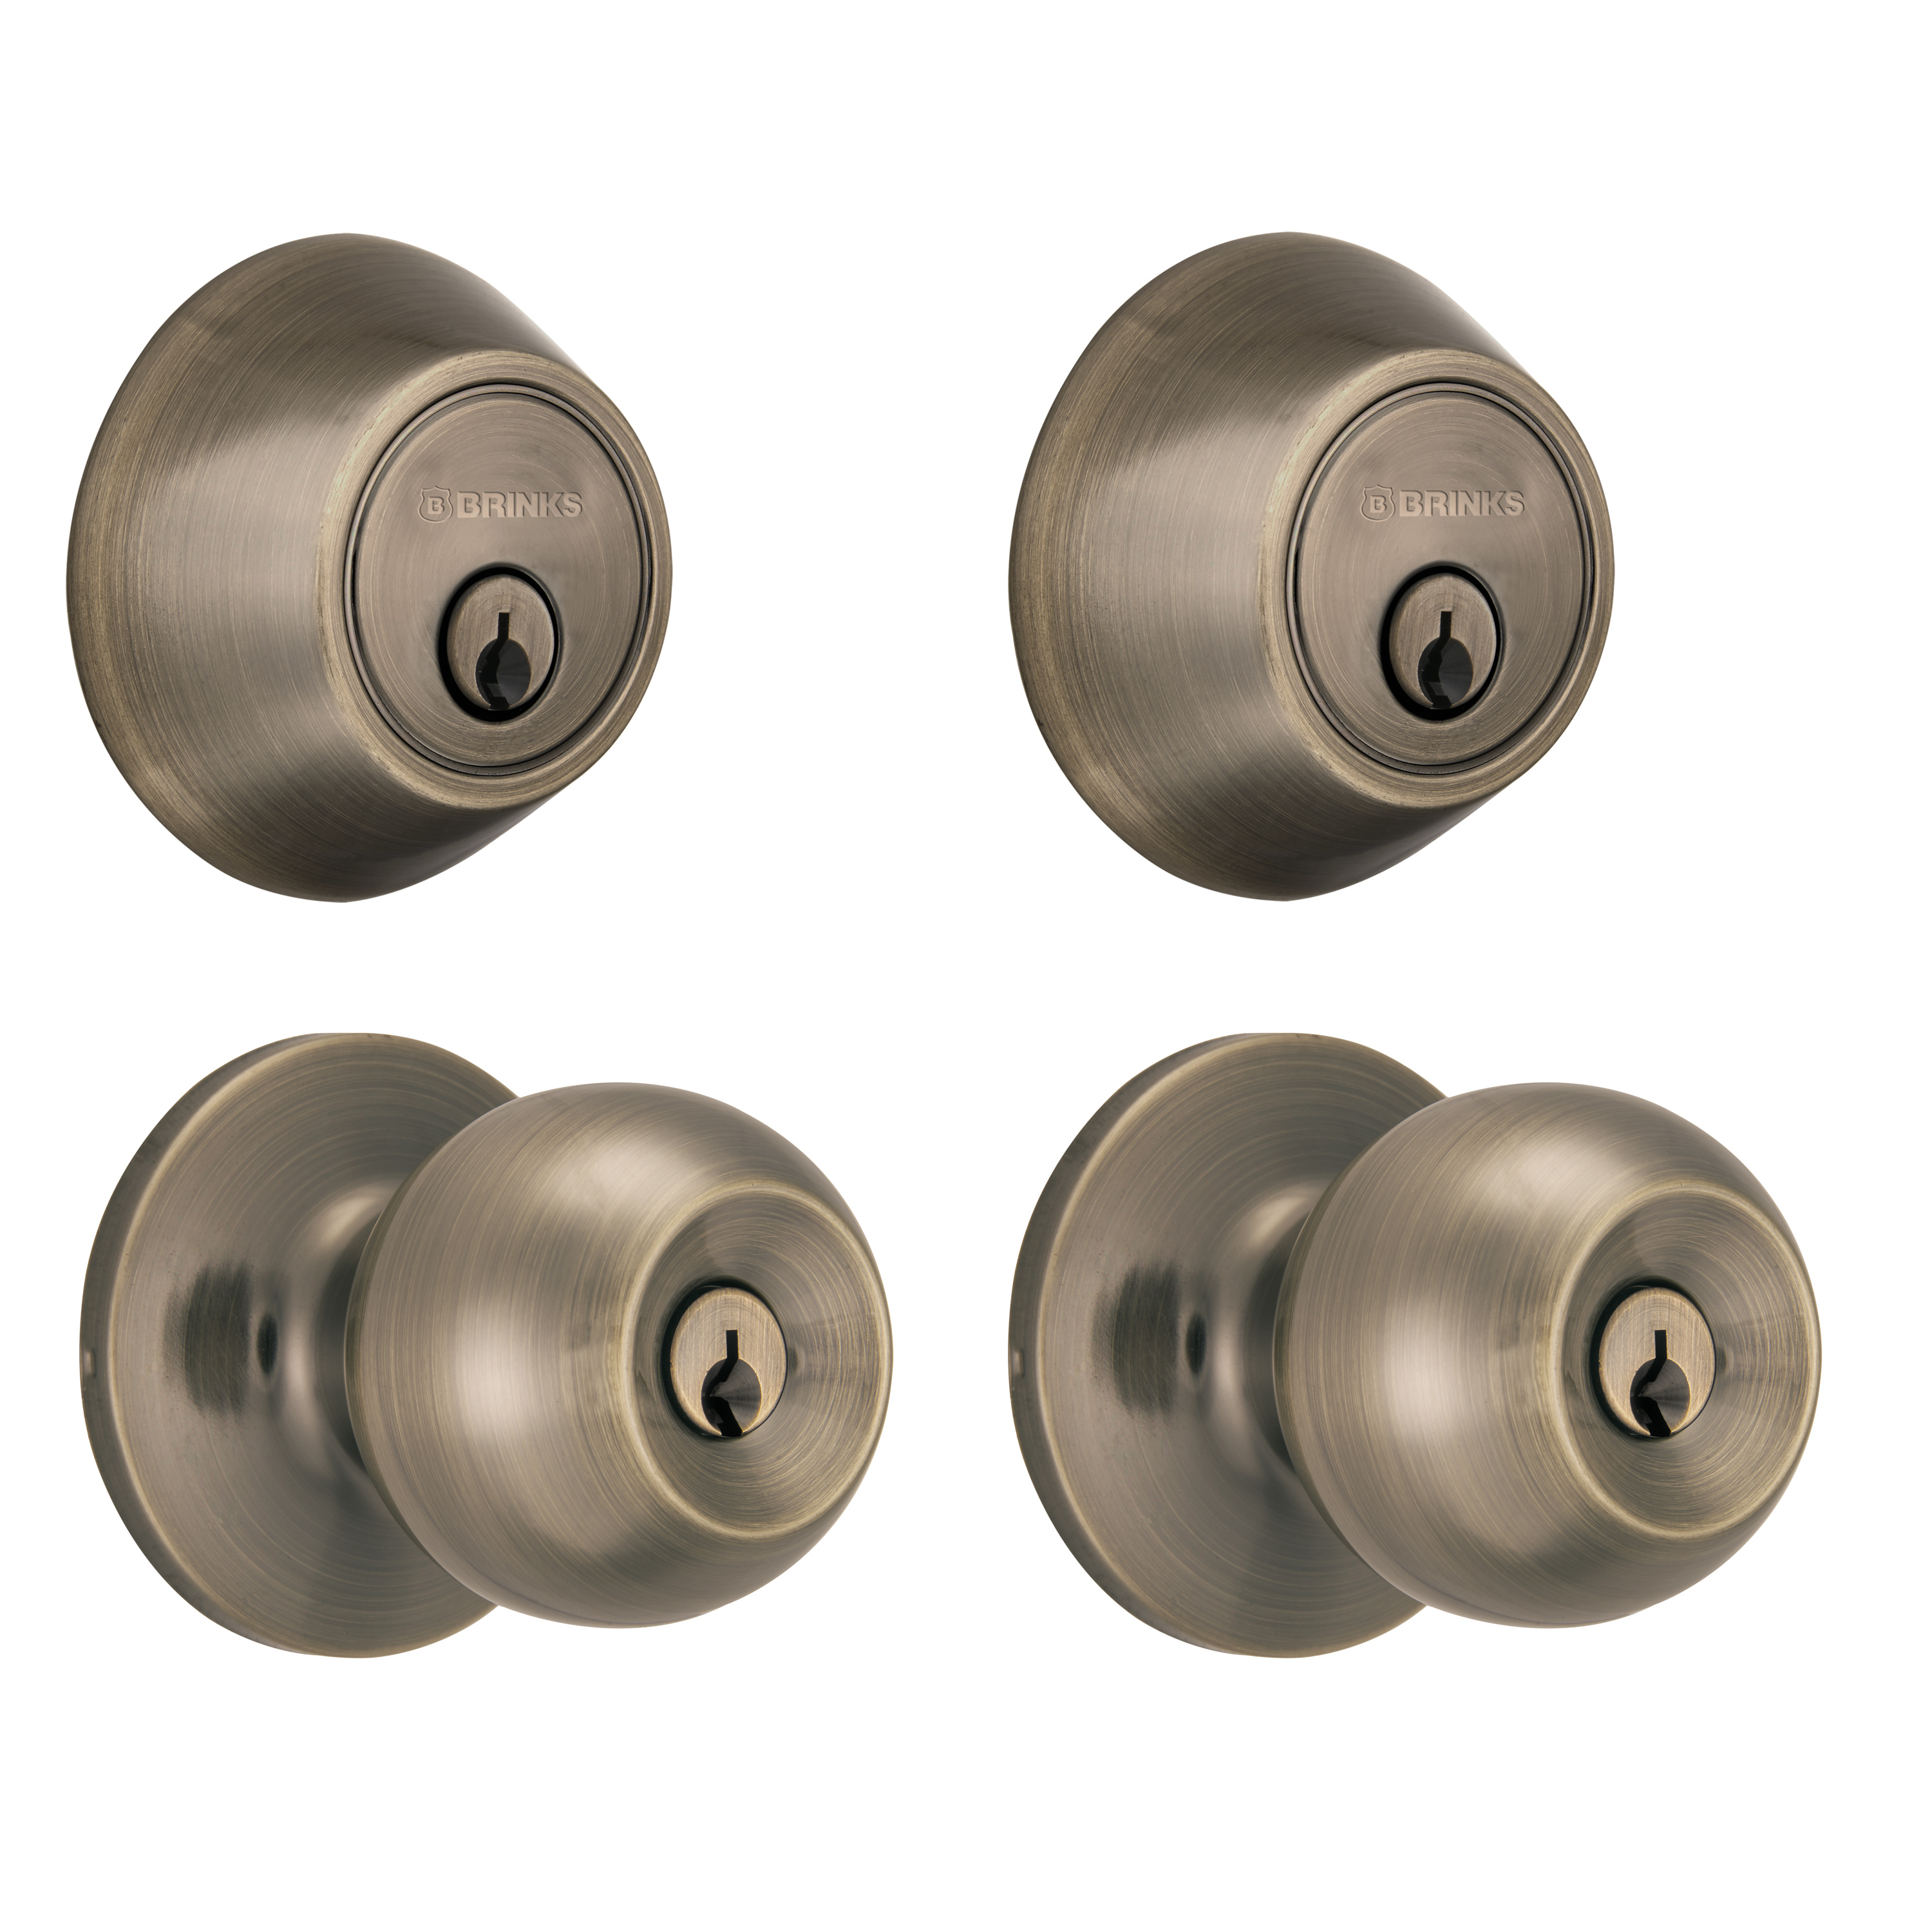 Brinks Keyed Entry Ball Style Doorknob and Deadbolt Combo, Antique Brass Finish, Twin Pack - image 1 of 15